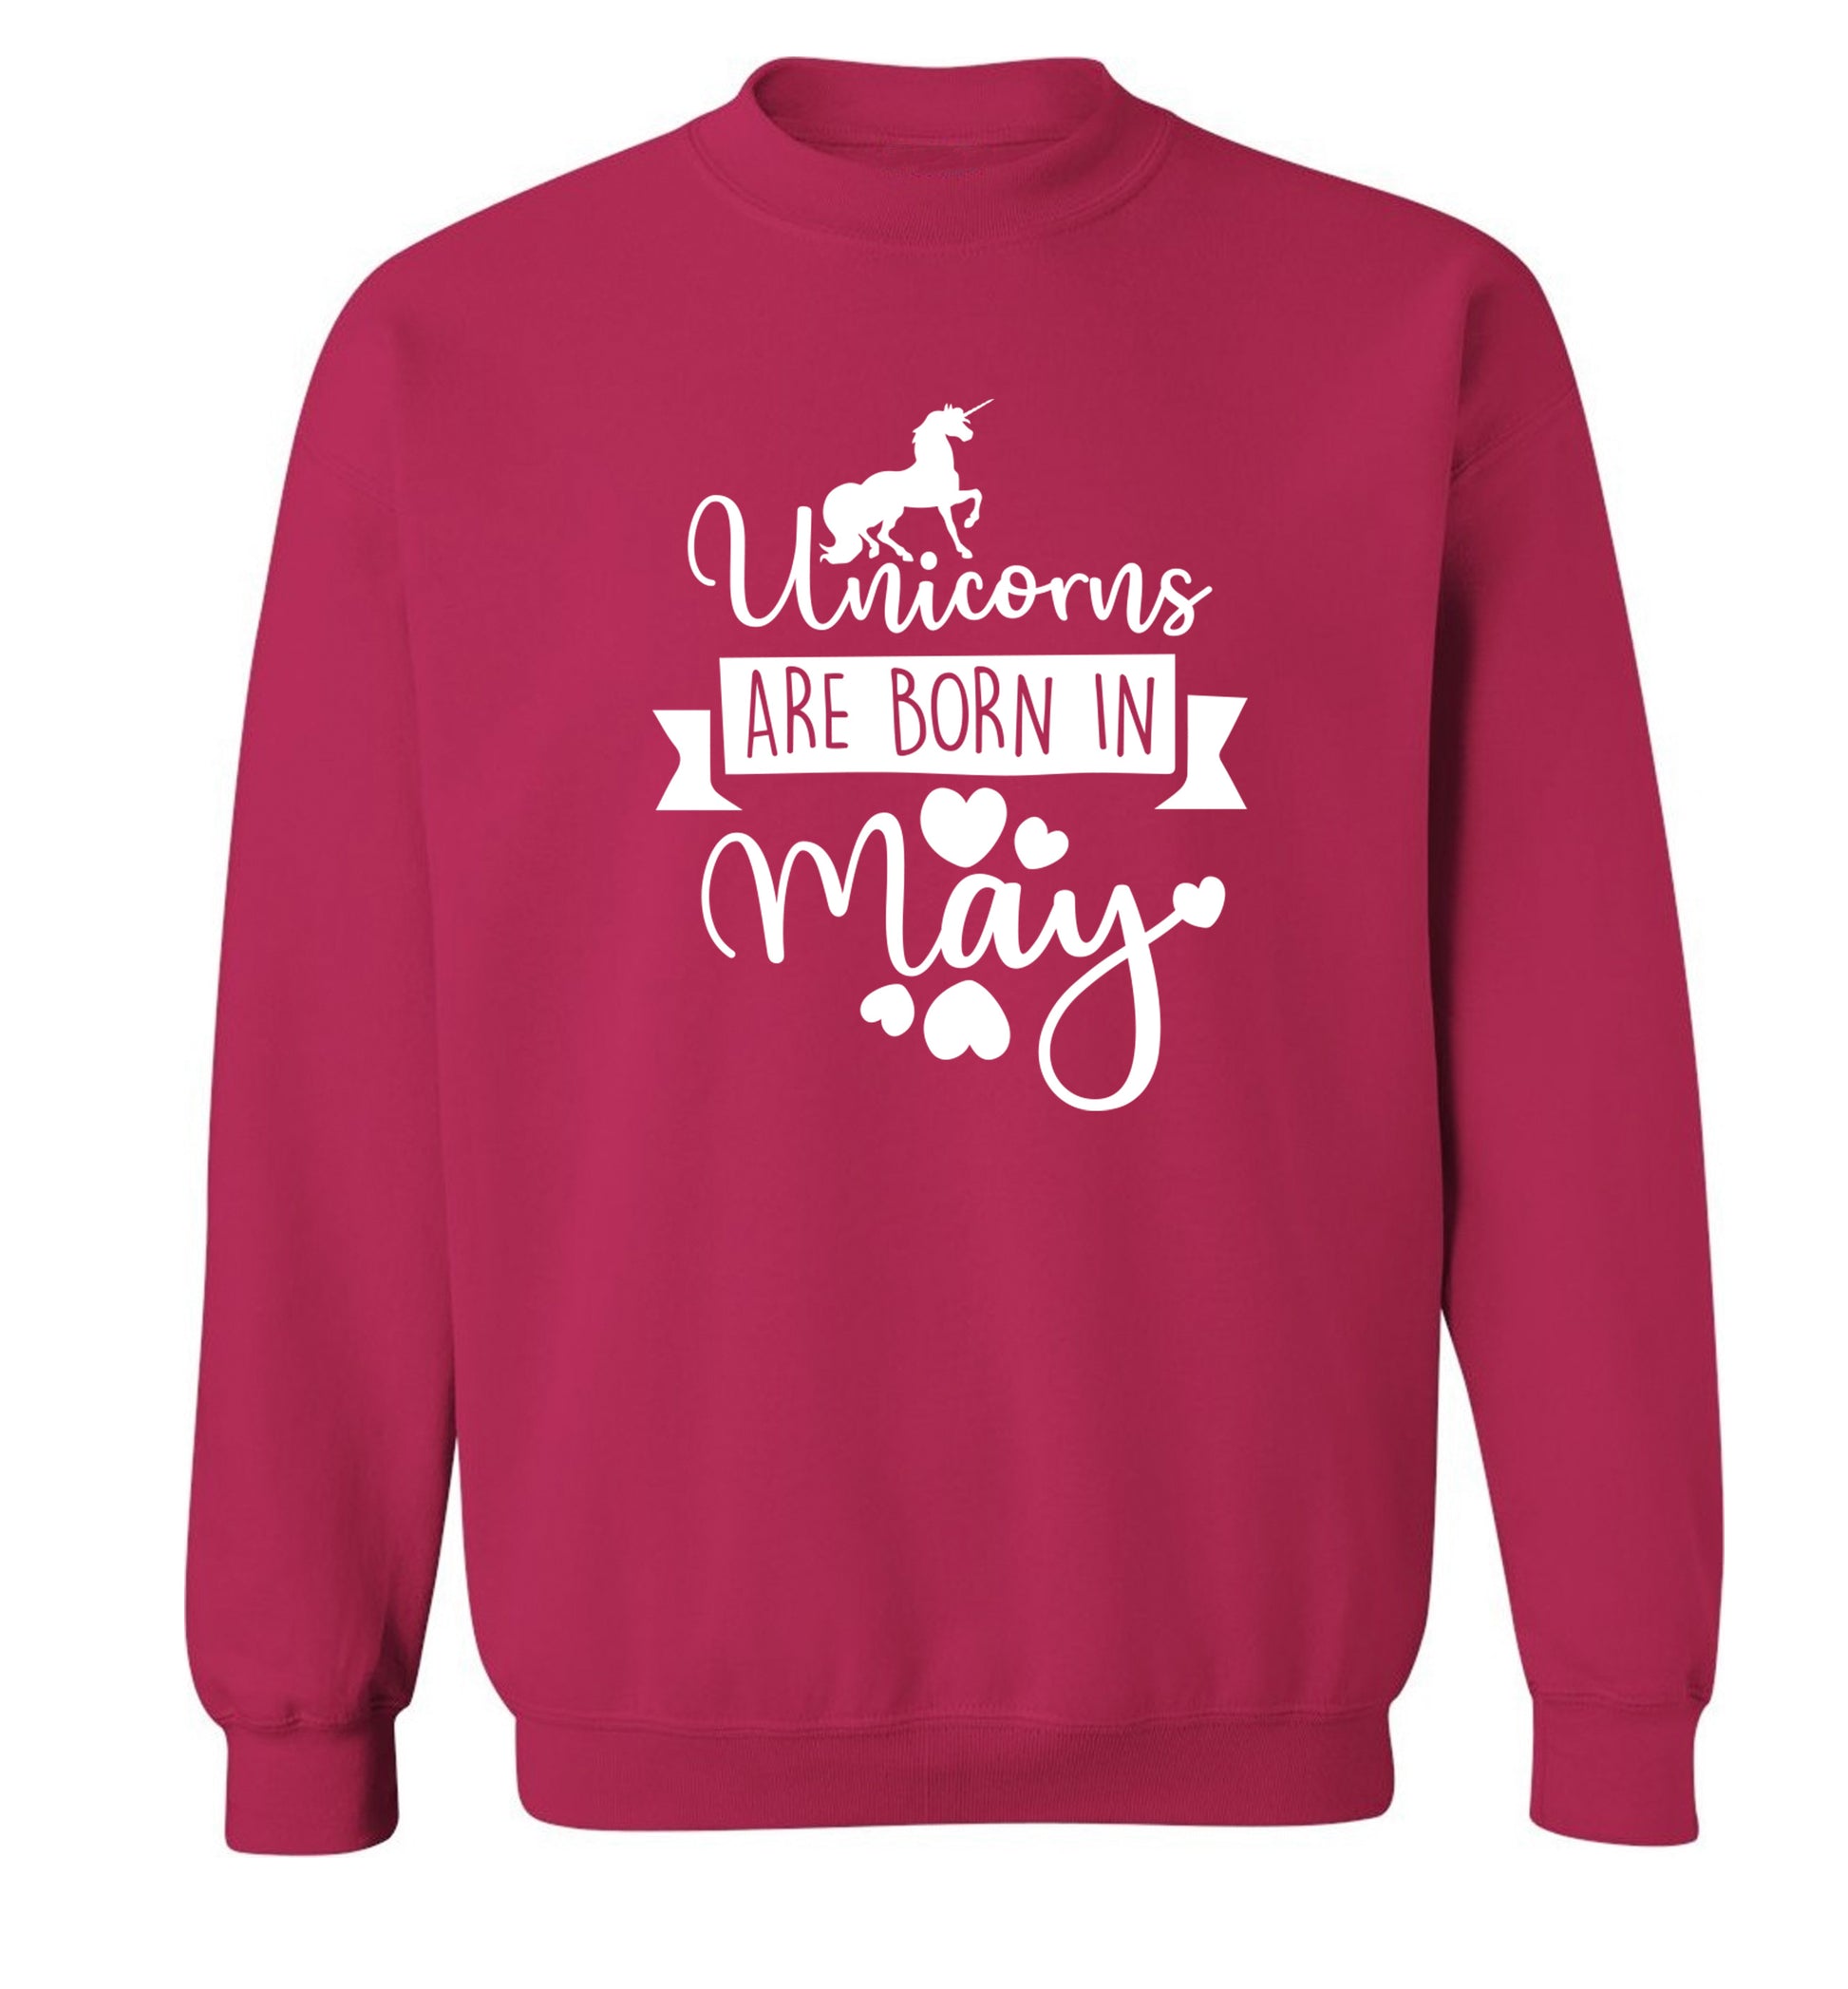 Unicorns are born in May Adult's unisex pink Sweater 2XL